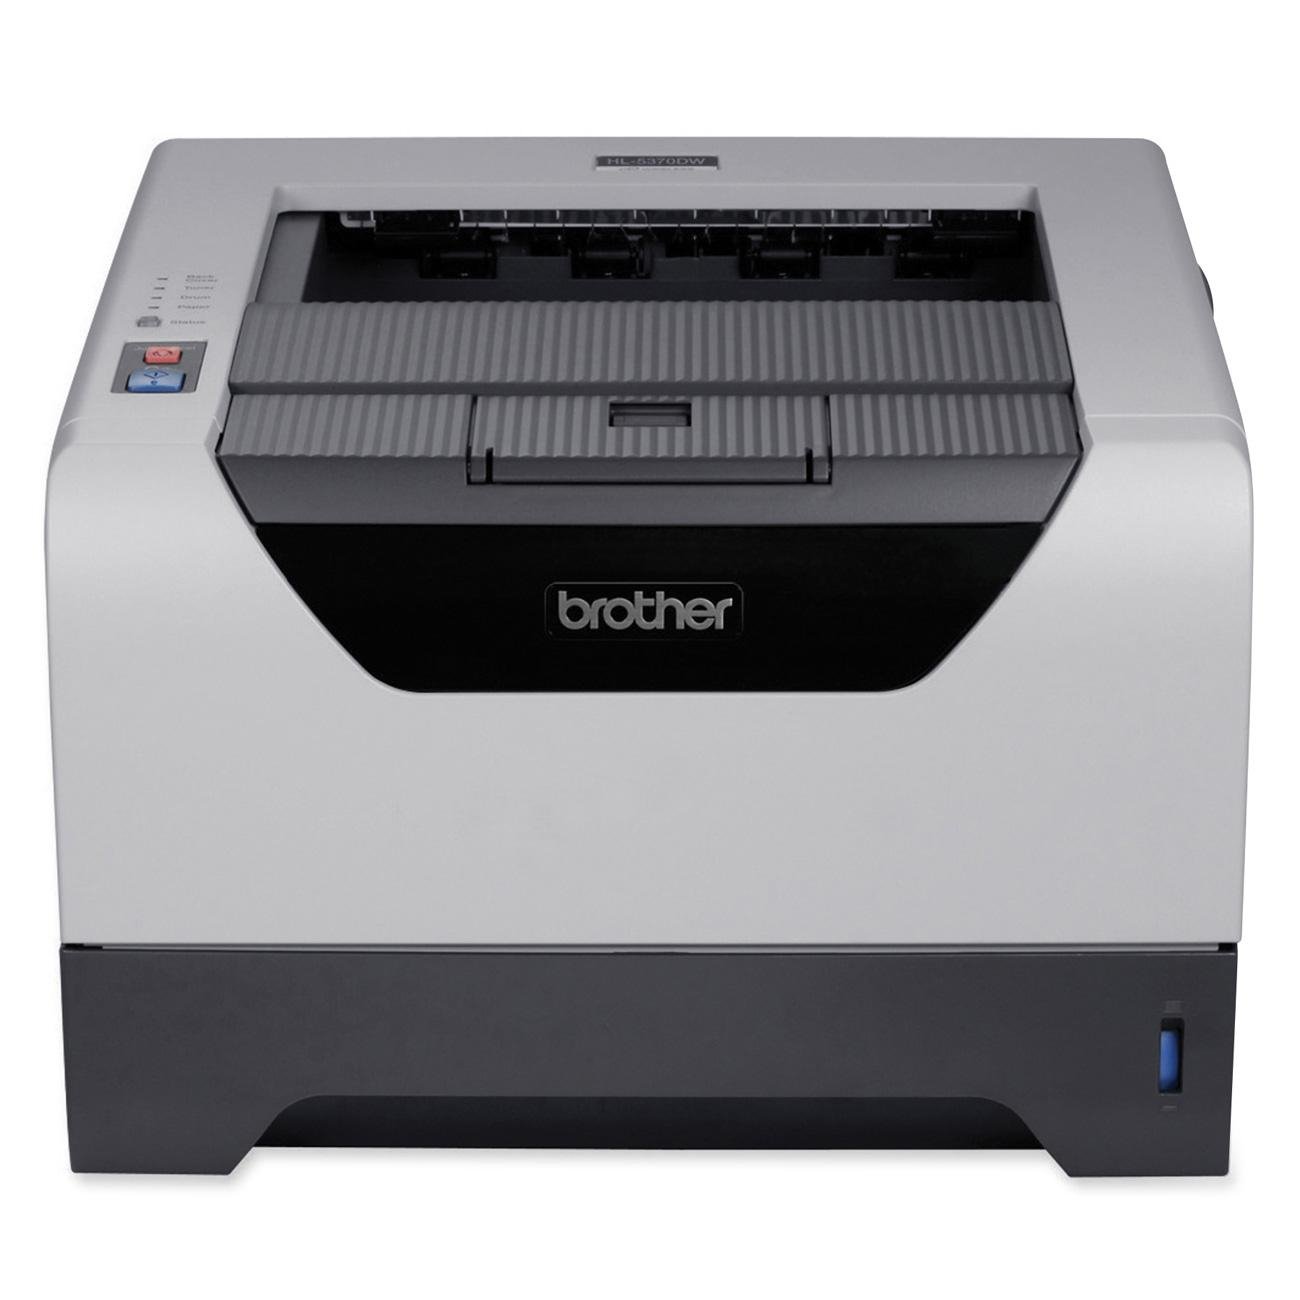 Power button and error message on Brother HL 5470DW printer